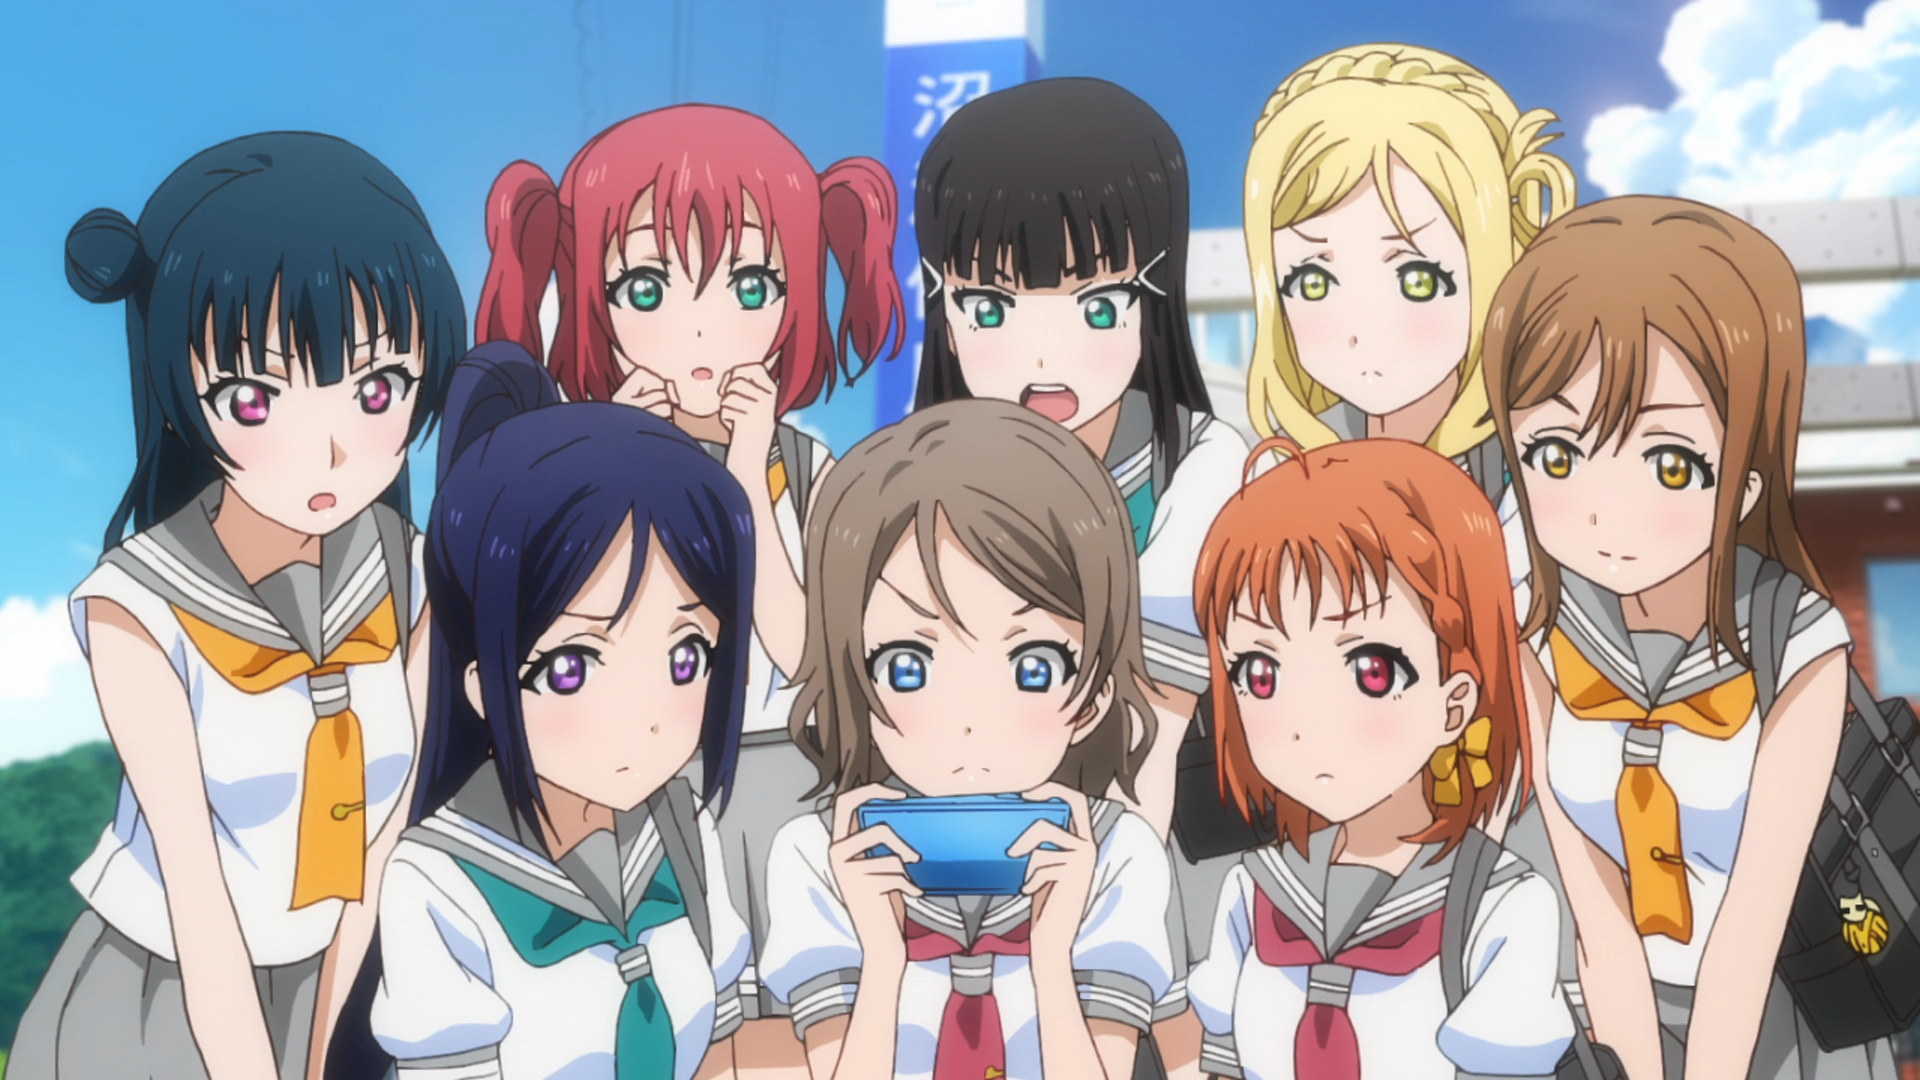 The girls of Aqours gather around a smart phone to check out the school idol rankings in a scene from the Love Live! Sunshine !! TV anime.